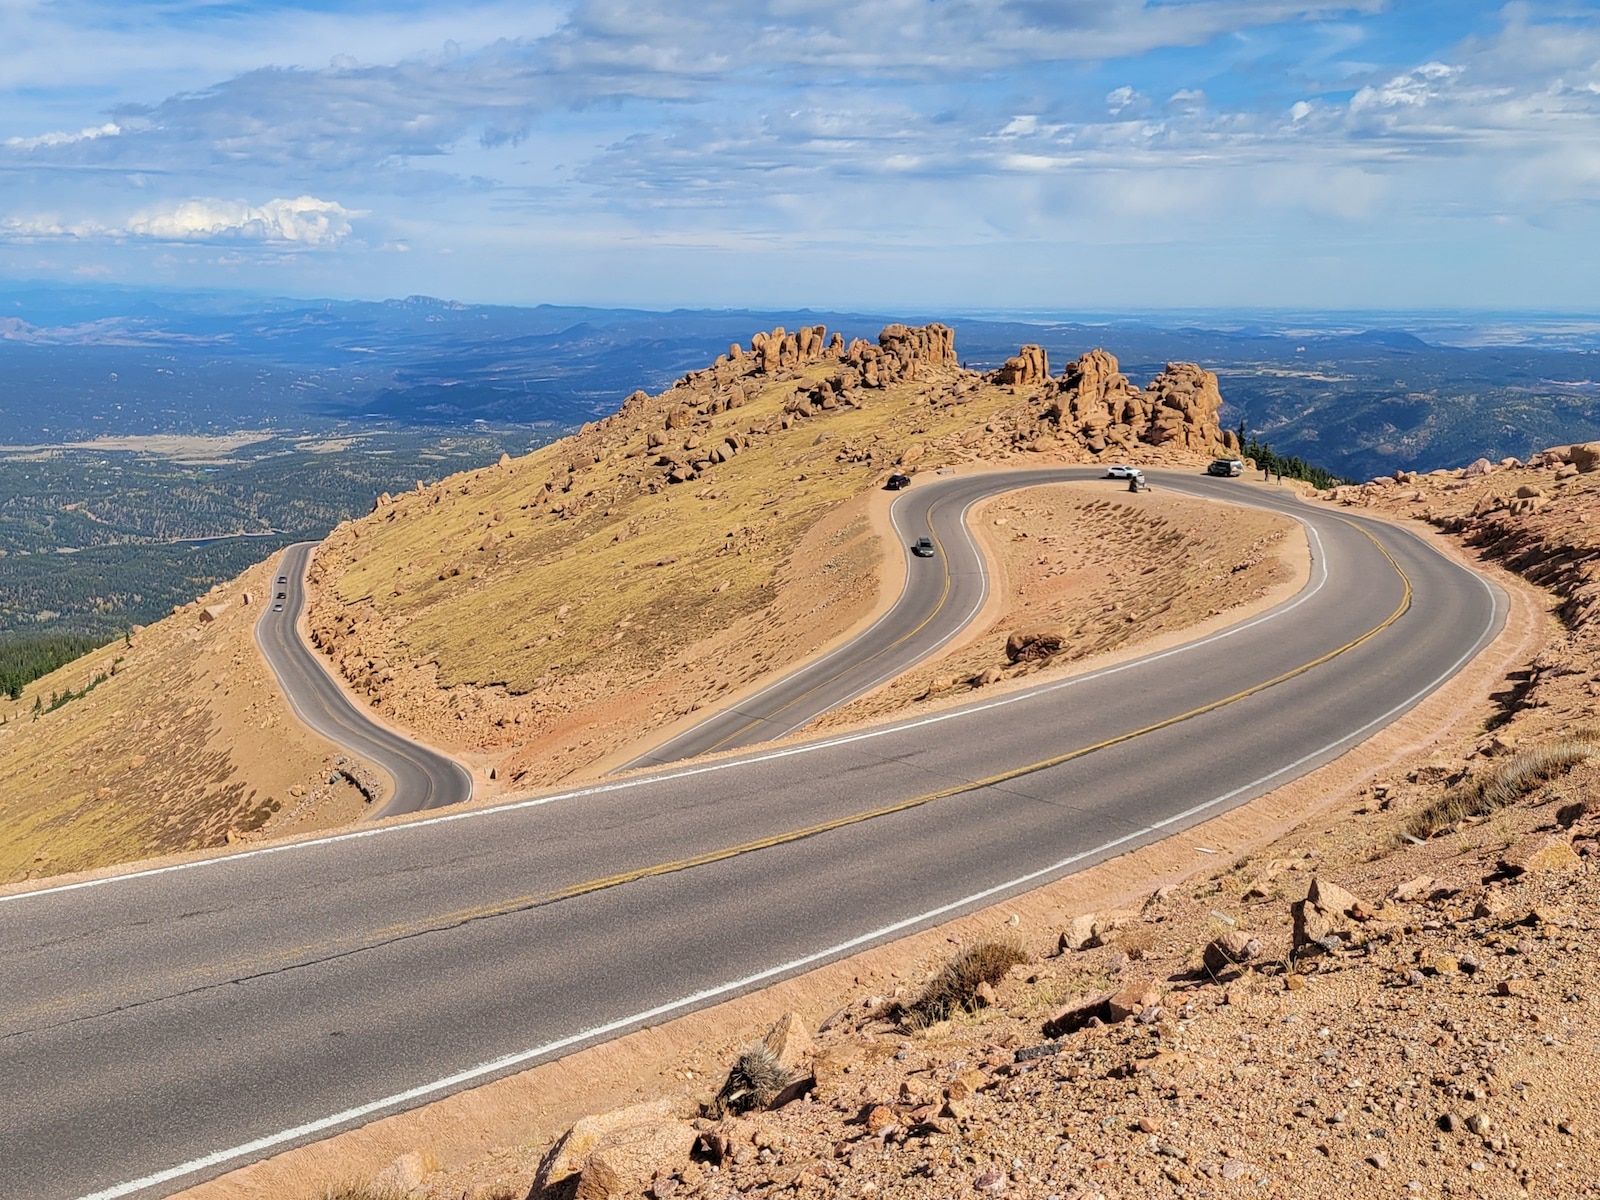 A few cars driving up Pikes Peak Highway with view of the switchbacks